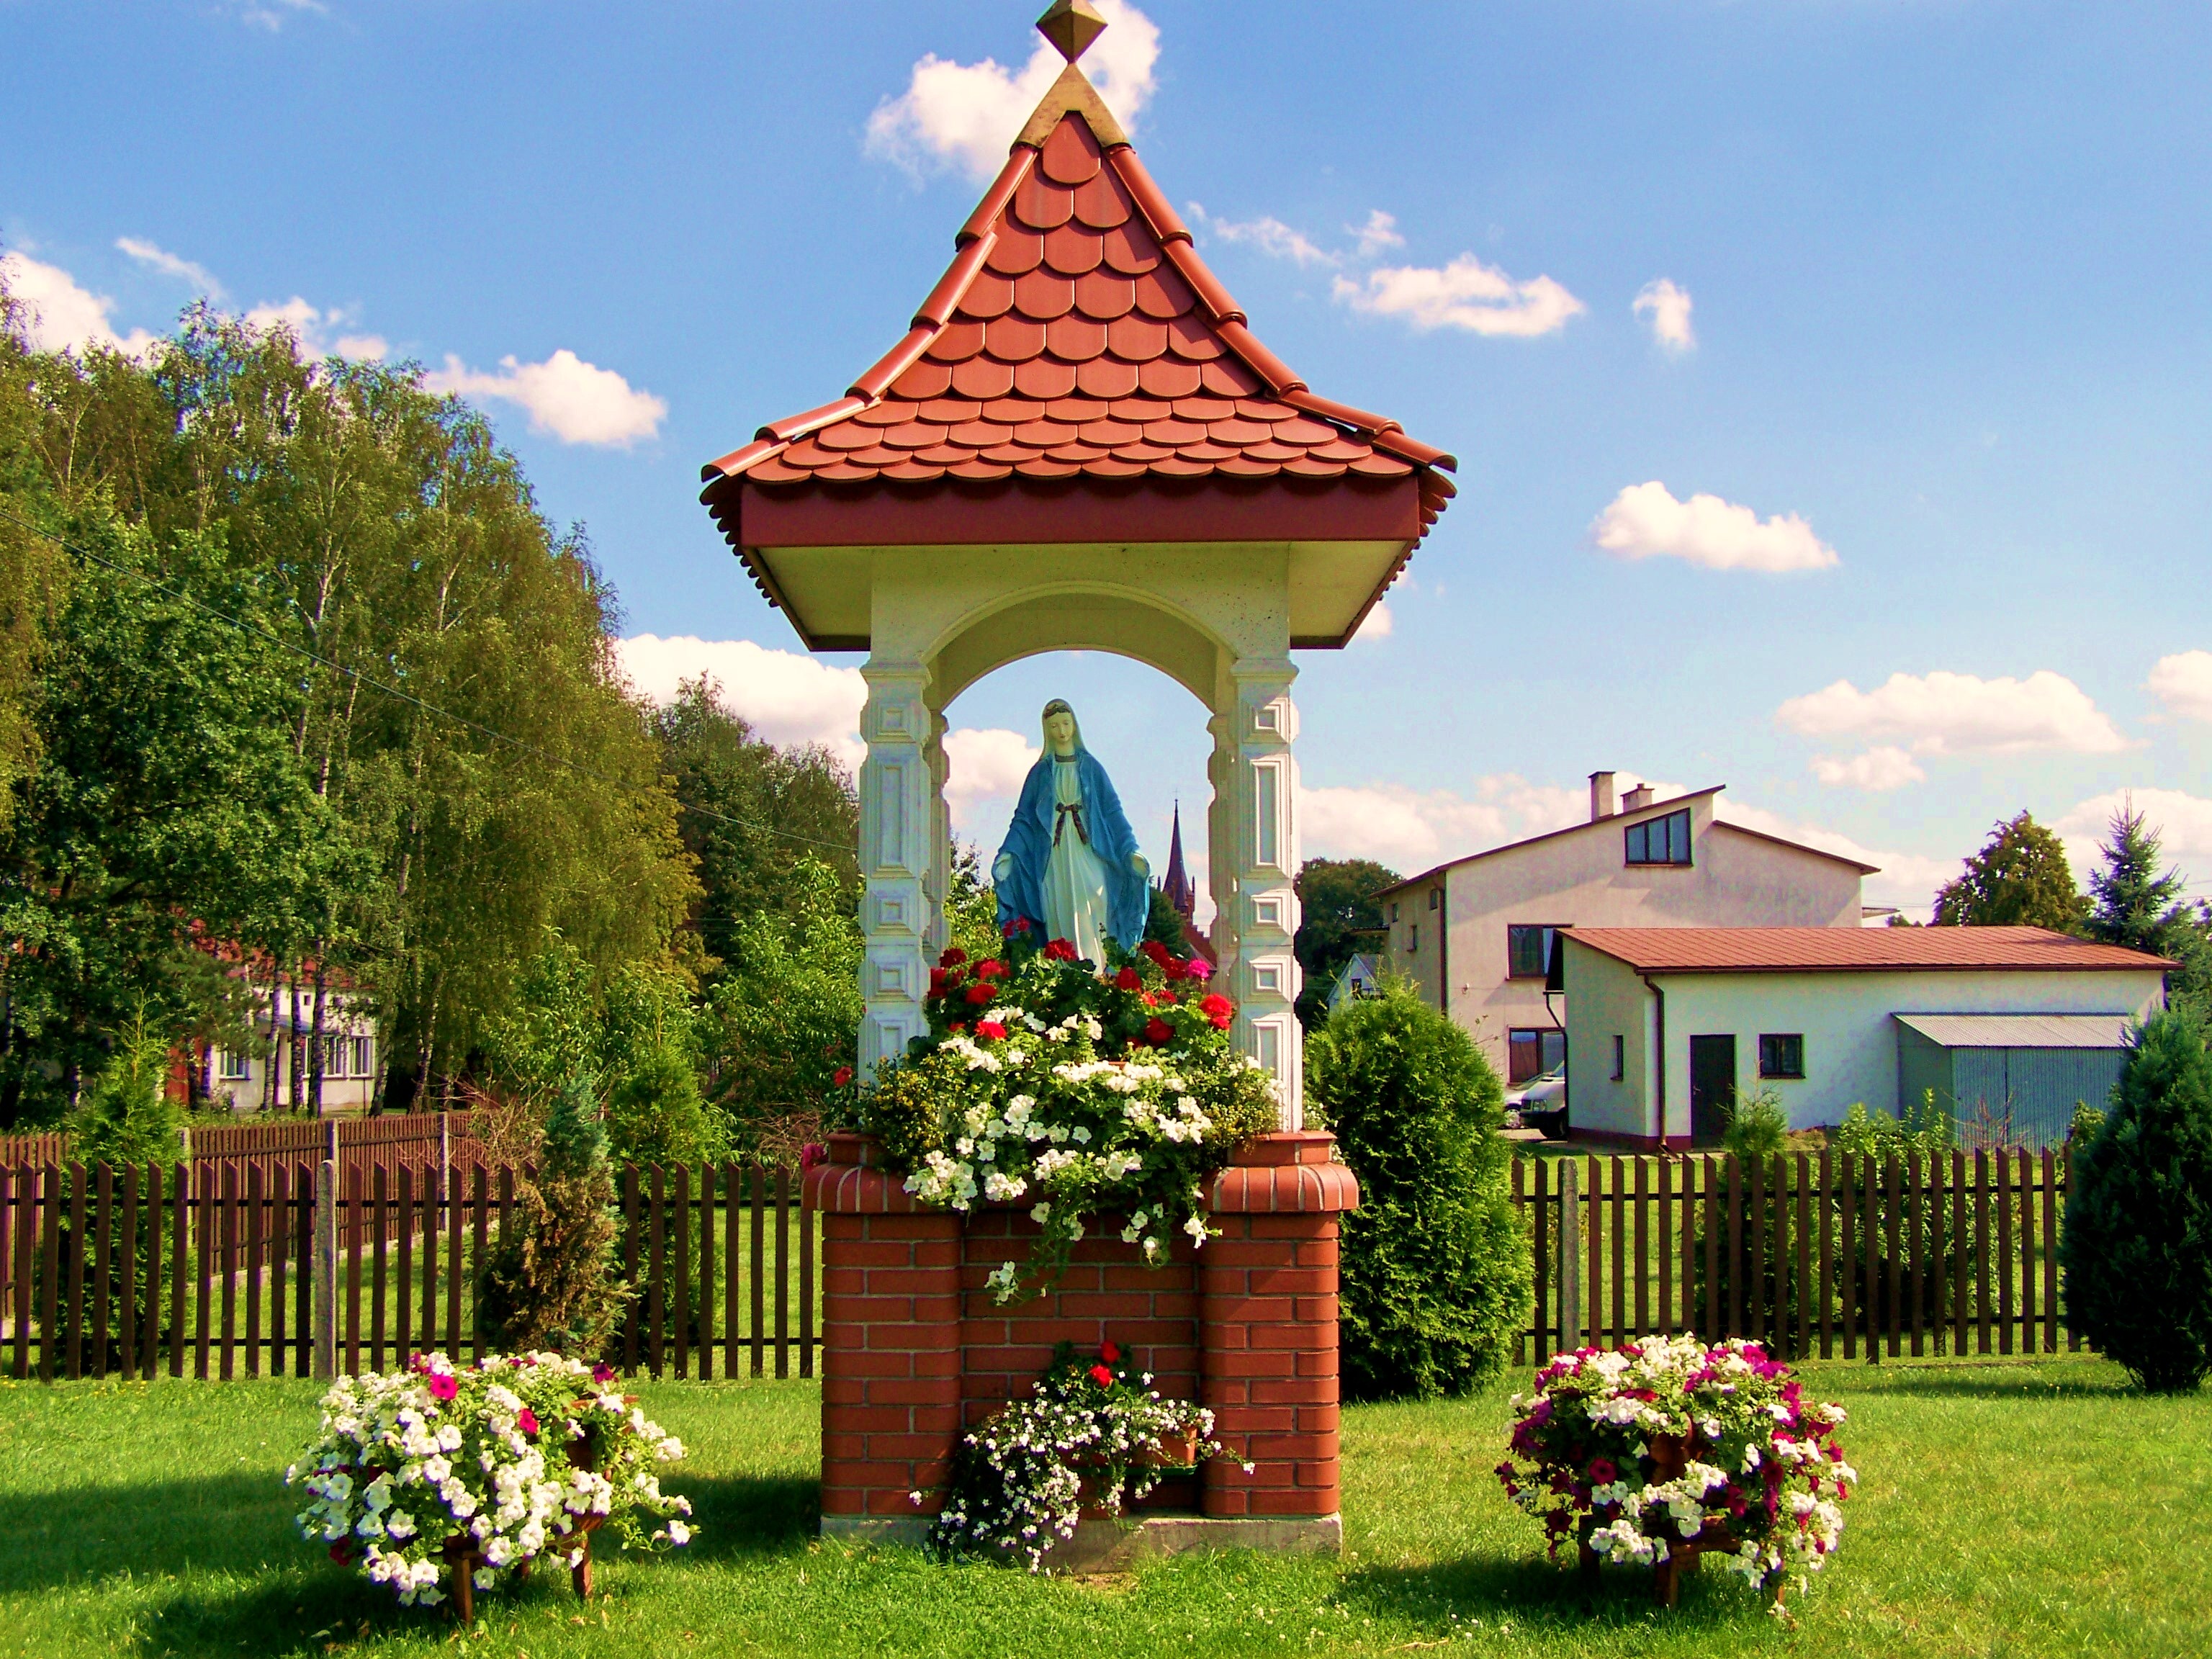 Mexican Virgin Mary Wallpaper Shrines To The